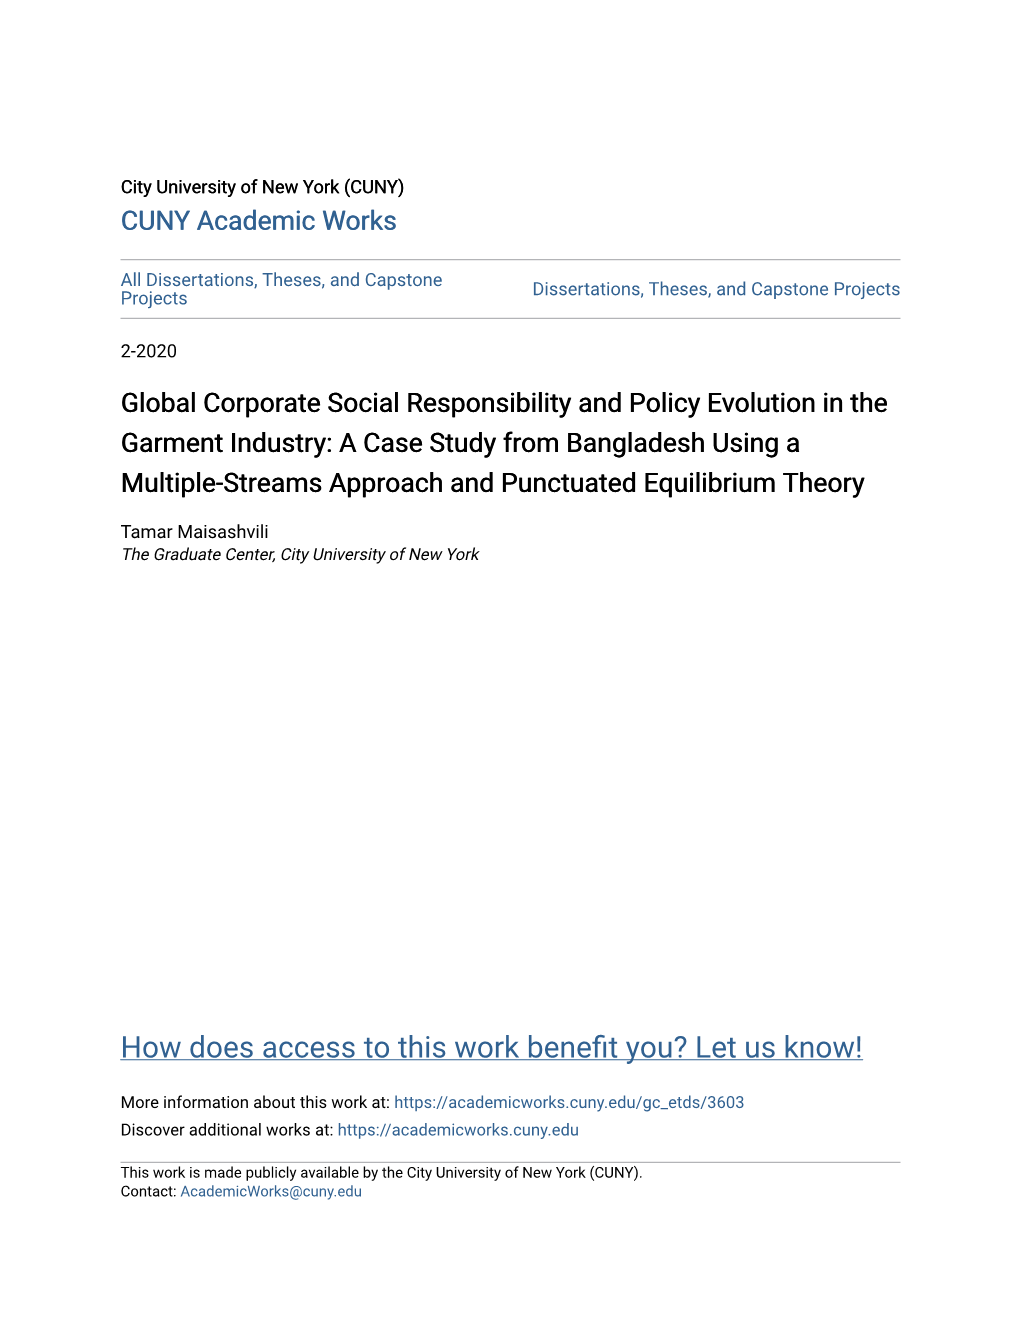 Global Corporate Social Responsibility and Policy Evolution